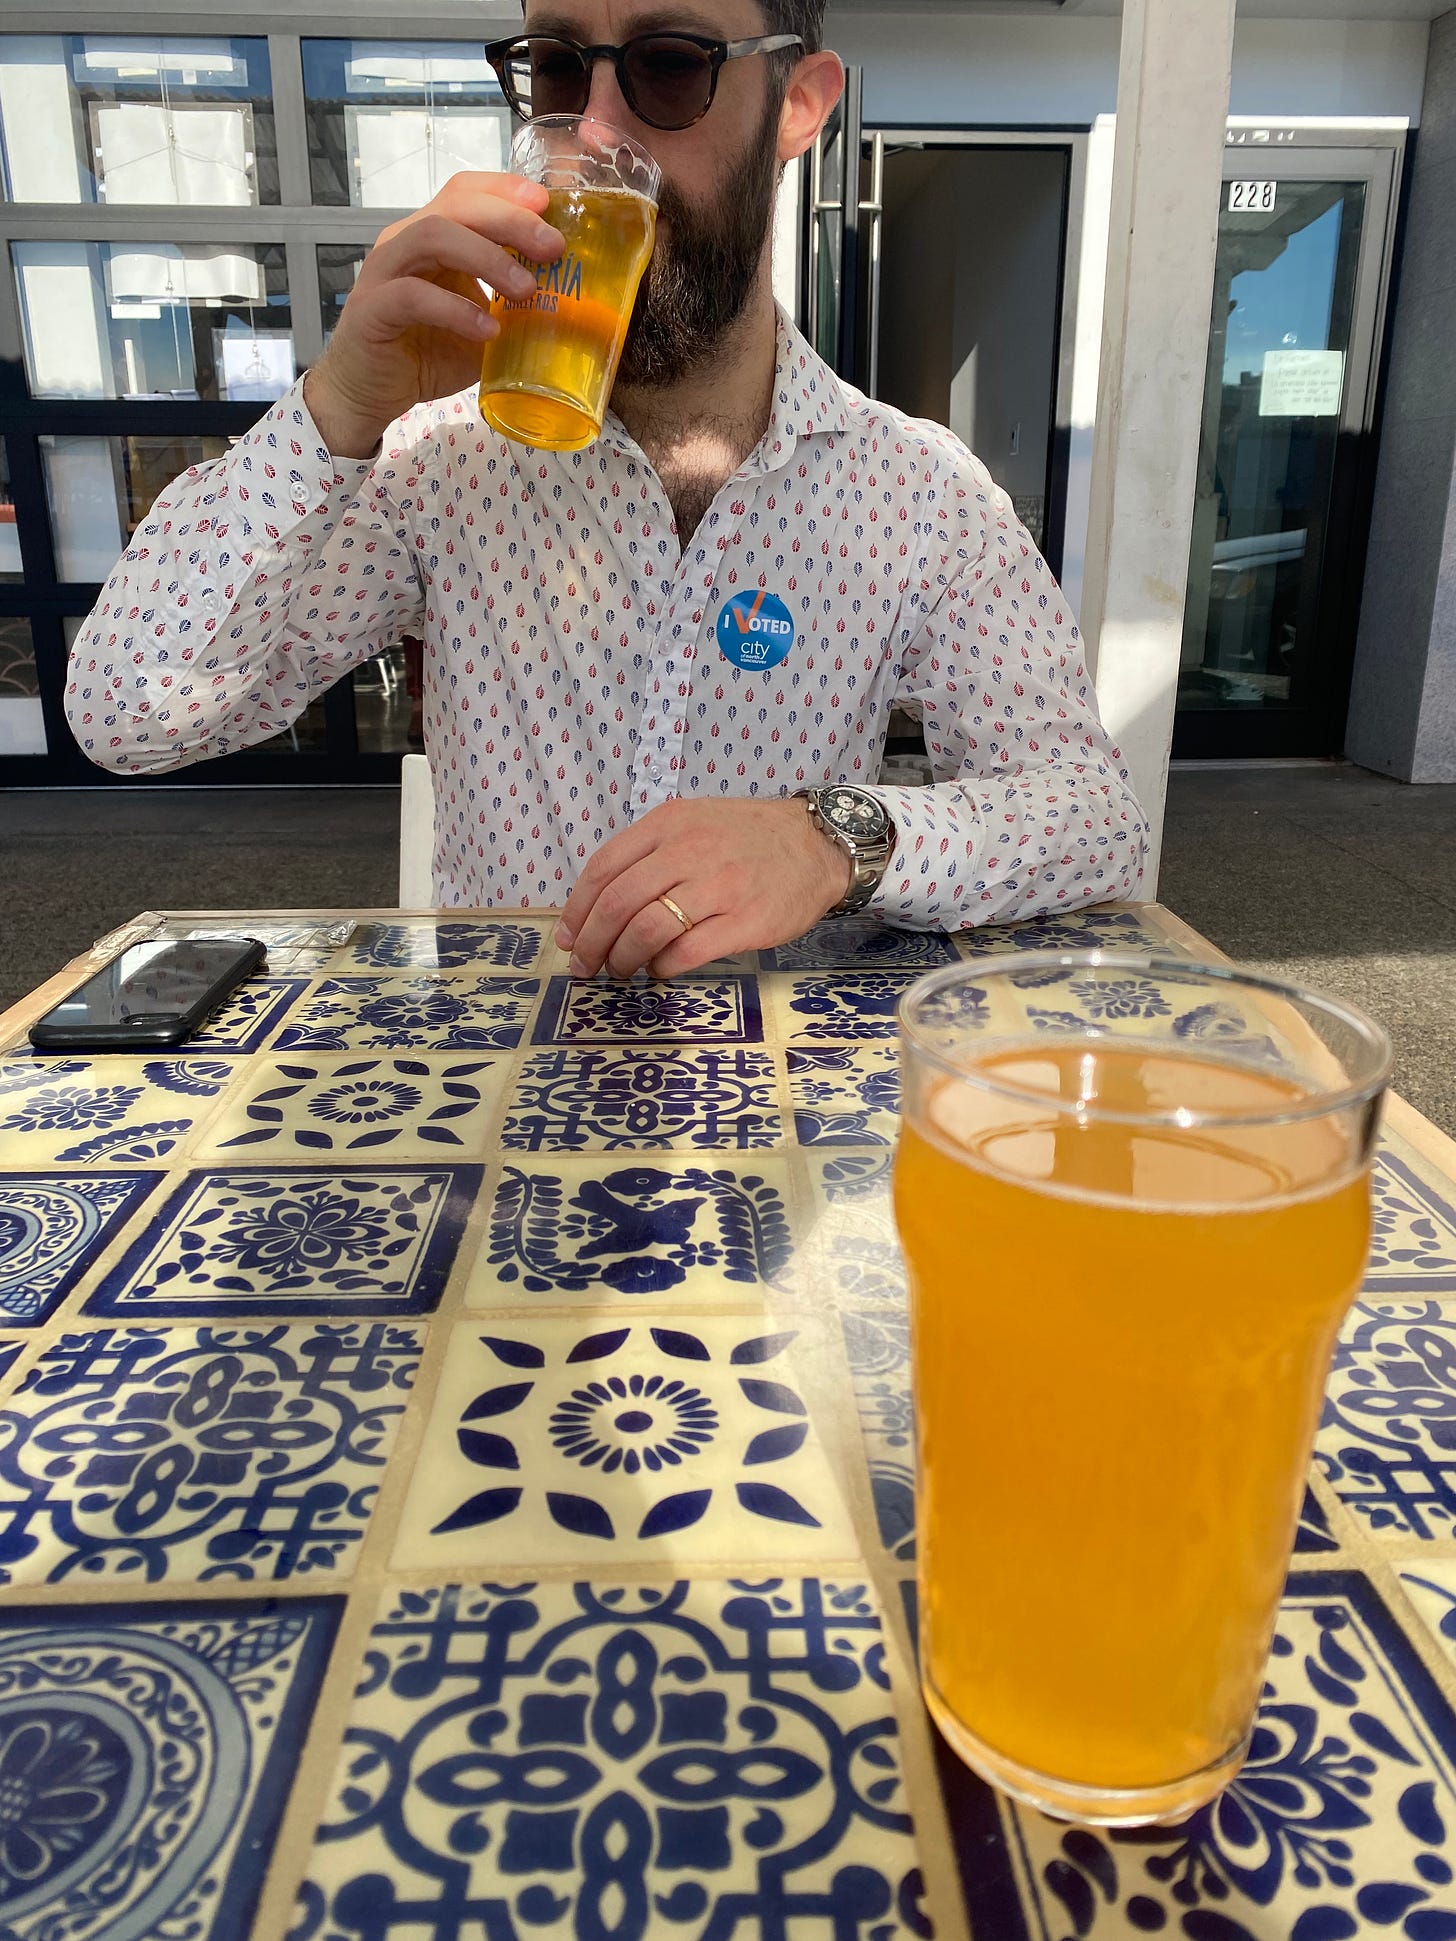 A table made of white and blue Mexican tiles, with a golden glass of beer in the foreground. Across the table, Jeff sips his own glass of beer. He is wearing sunglasses and a white shirt with a blue and arrow pattern, and there is a blue "I voted" sticker on his chest.